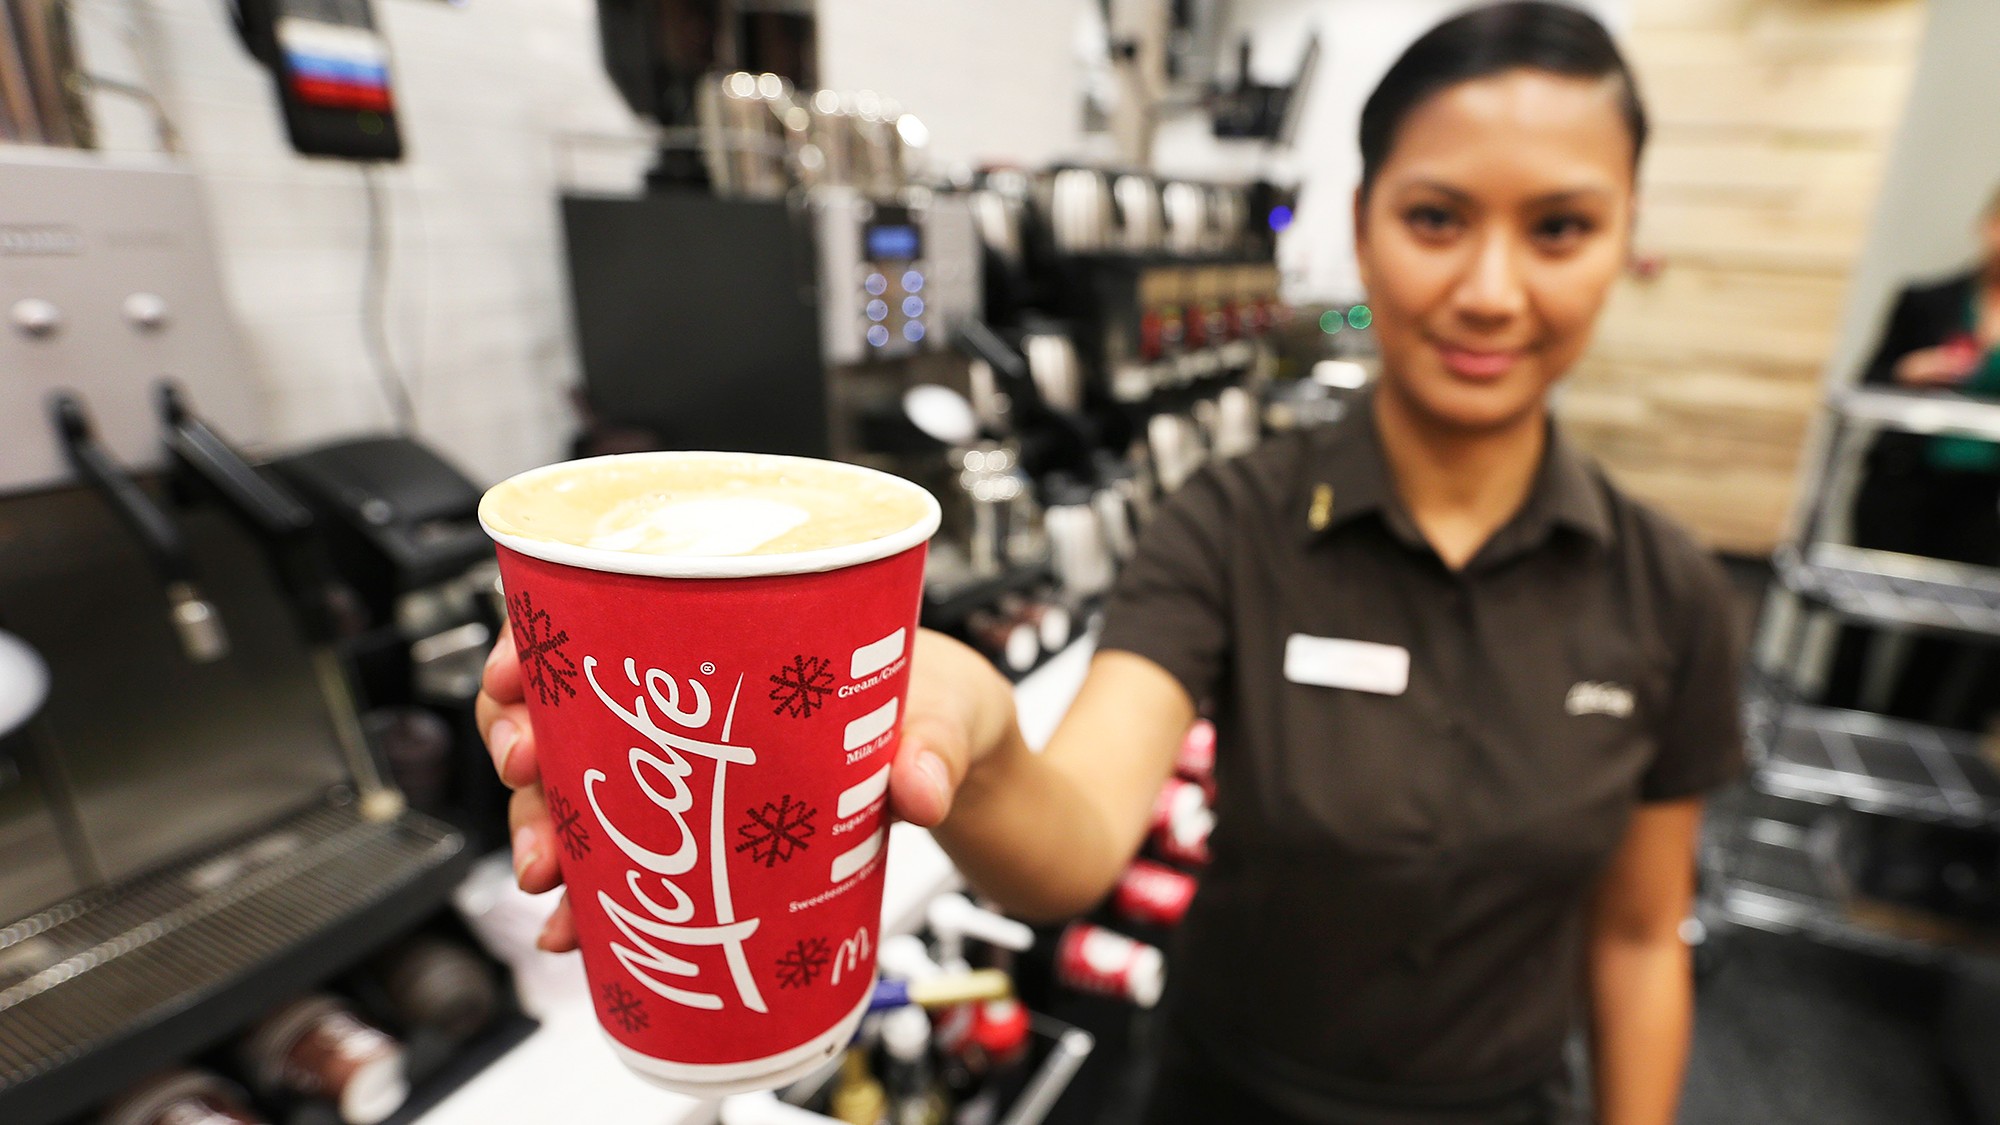 Woman Goes After McDonald’s For $13 Million After They Serve Her Cup Full Of Chemicals